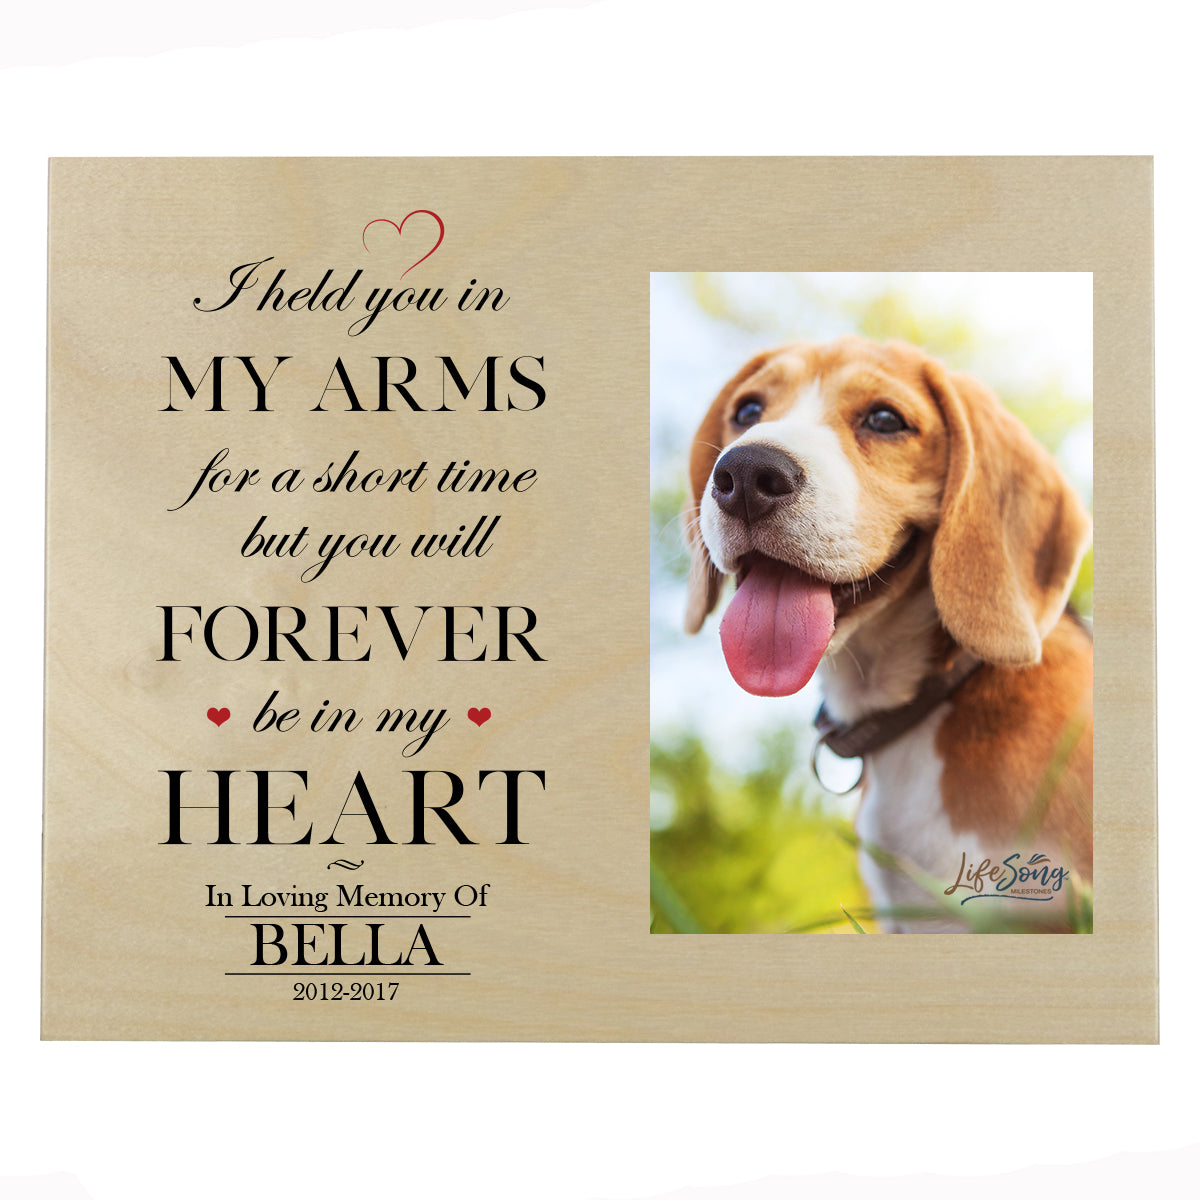 Pet Memorial Photo Wall Plaque Décor - I Held You In My Arms